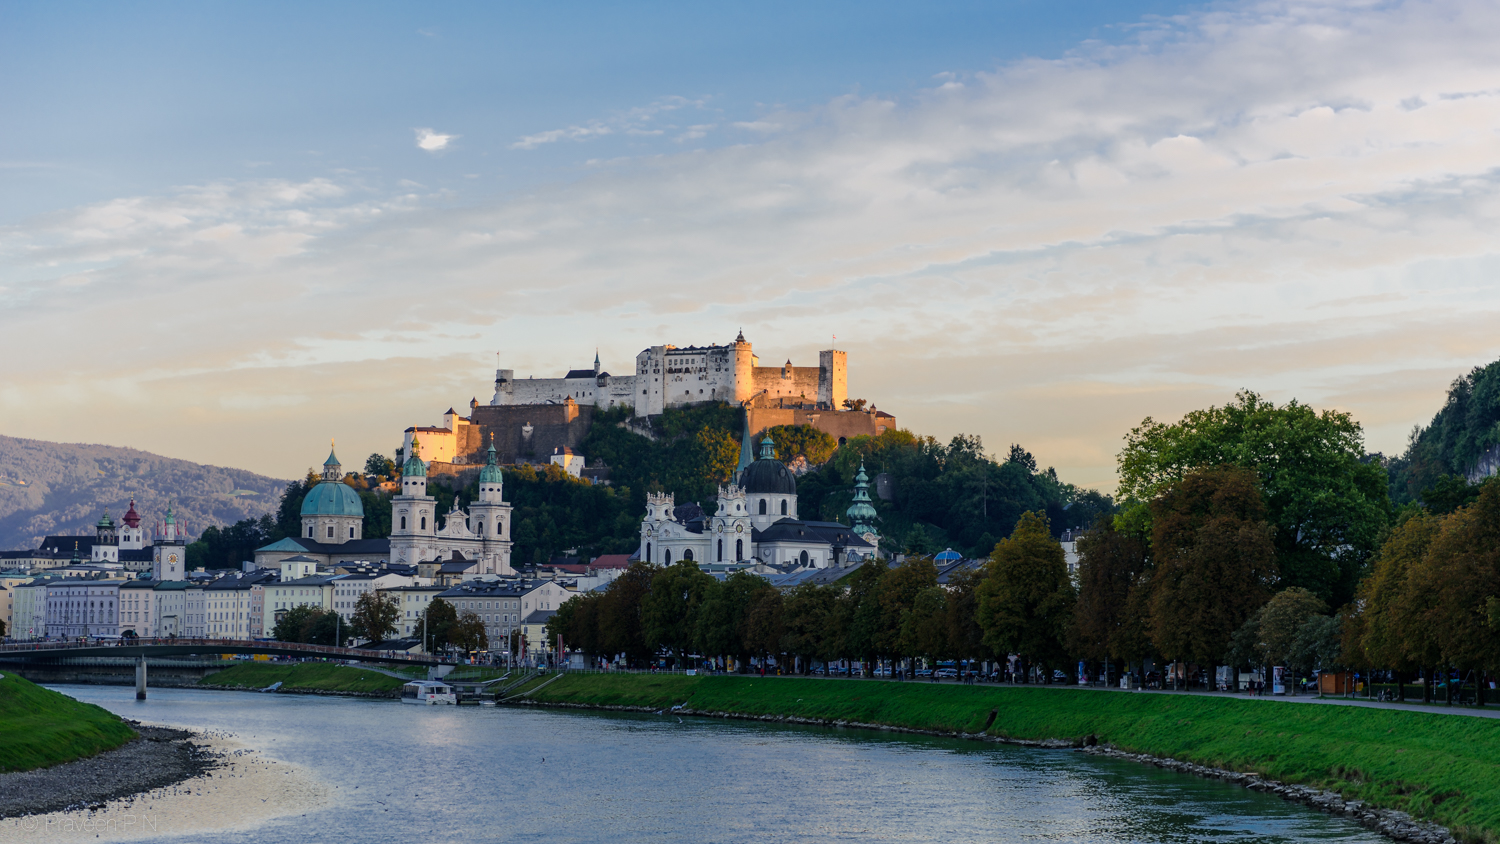 View from one of the bridges over Salzach